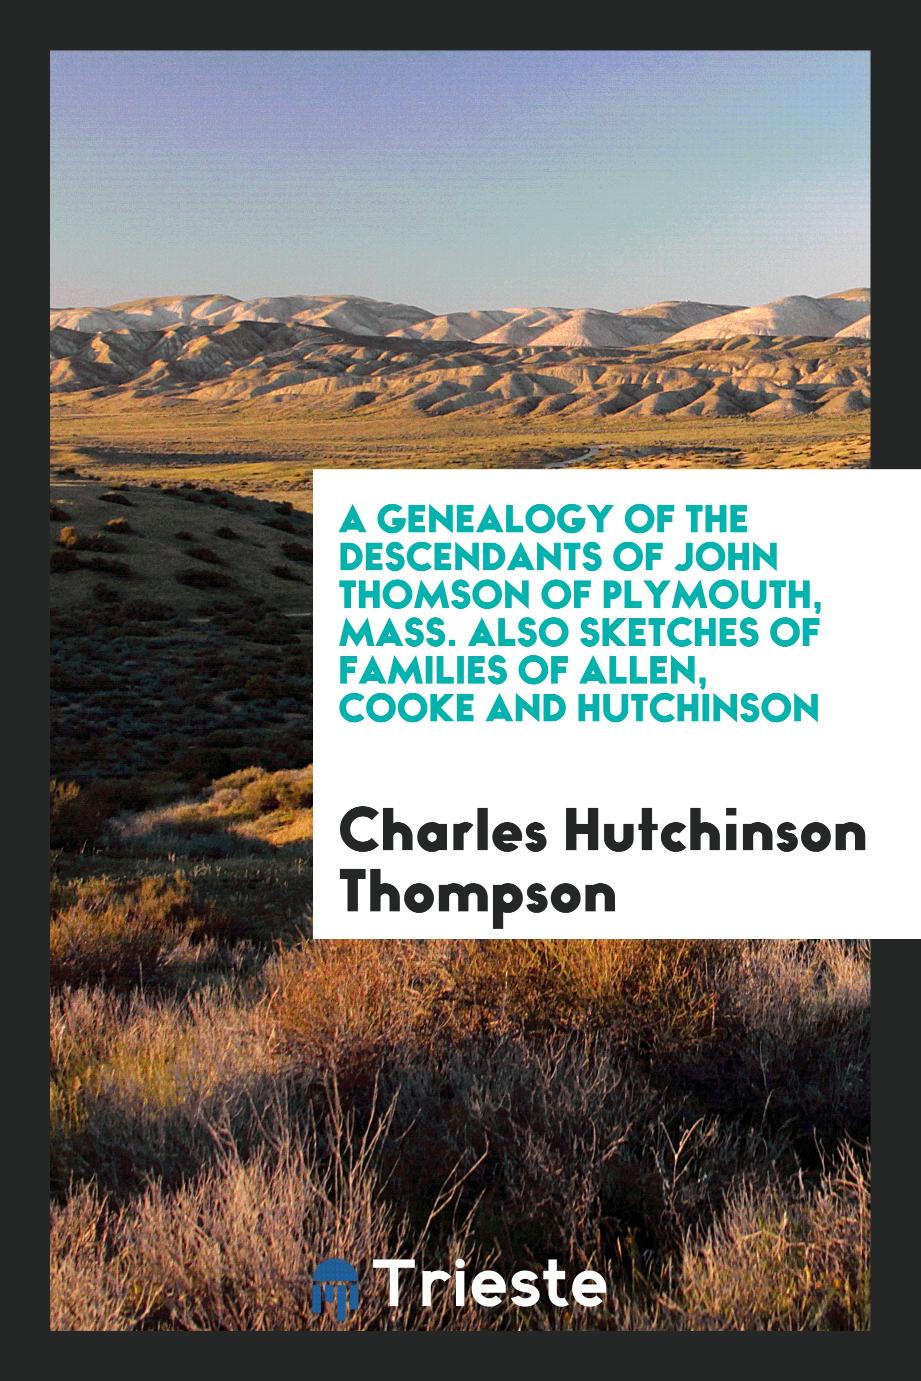 A Genealogy of the Descendants of John Thomson of Plymouth, Mass. Also Sketches of Families of Allen, Cooke and Hutchinson